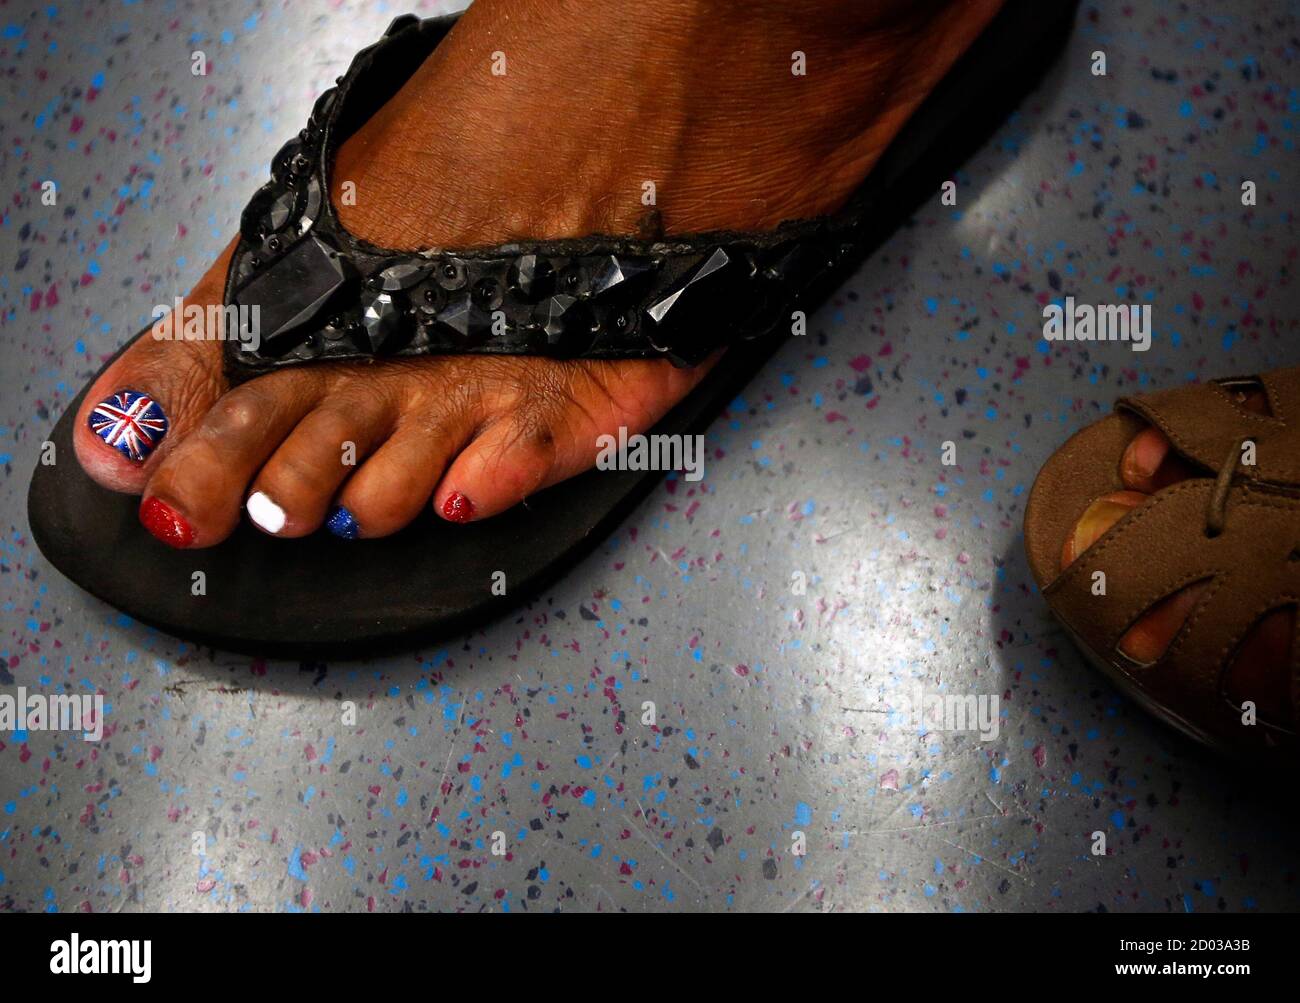 A woman riding the subway has her toe nail painted with the Union Jack ahead of the 2012 London Olympic Games in London July 26, 2012.  REUTERS/Brian Snyder  (BRITAIN - Tags: SPORT OLYMPICS SOCIETY) Stock Photo